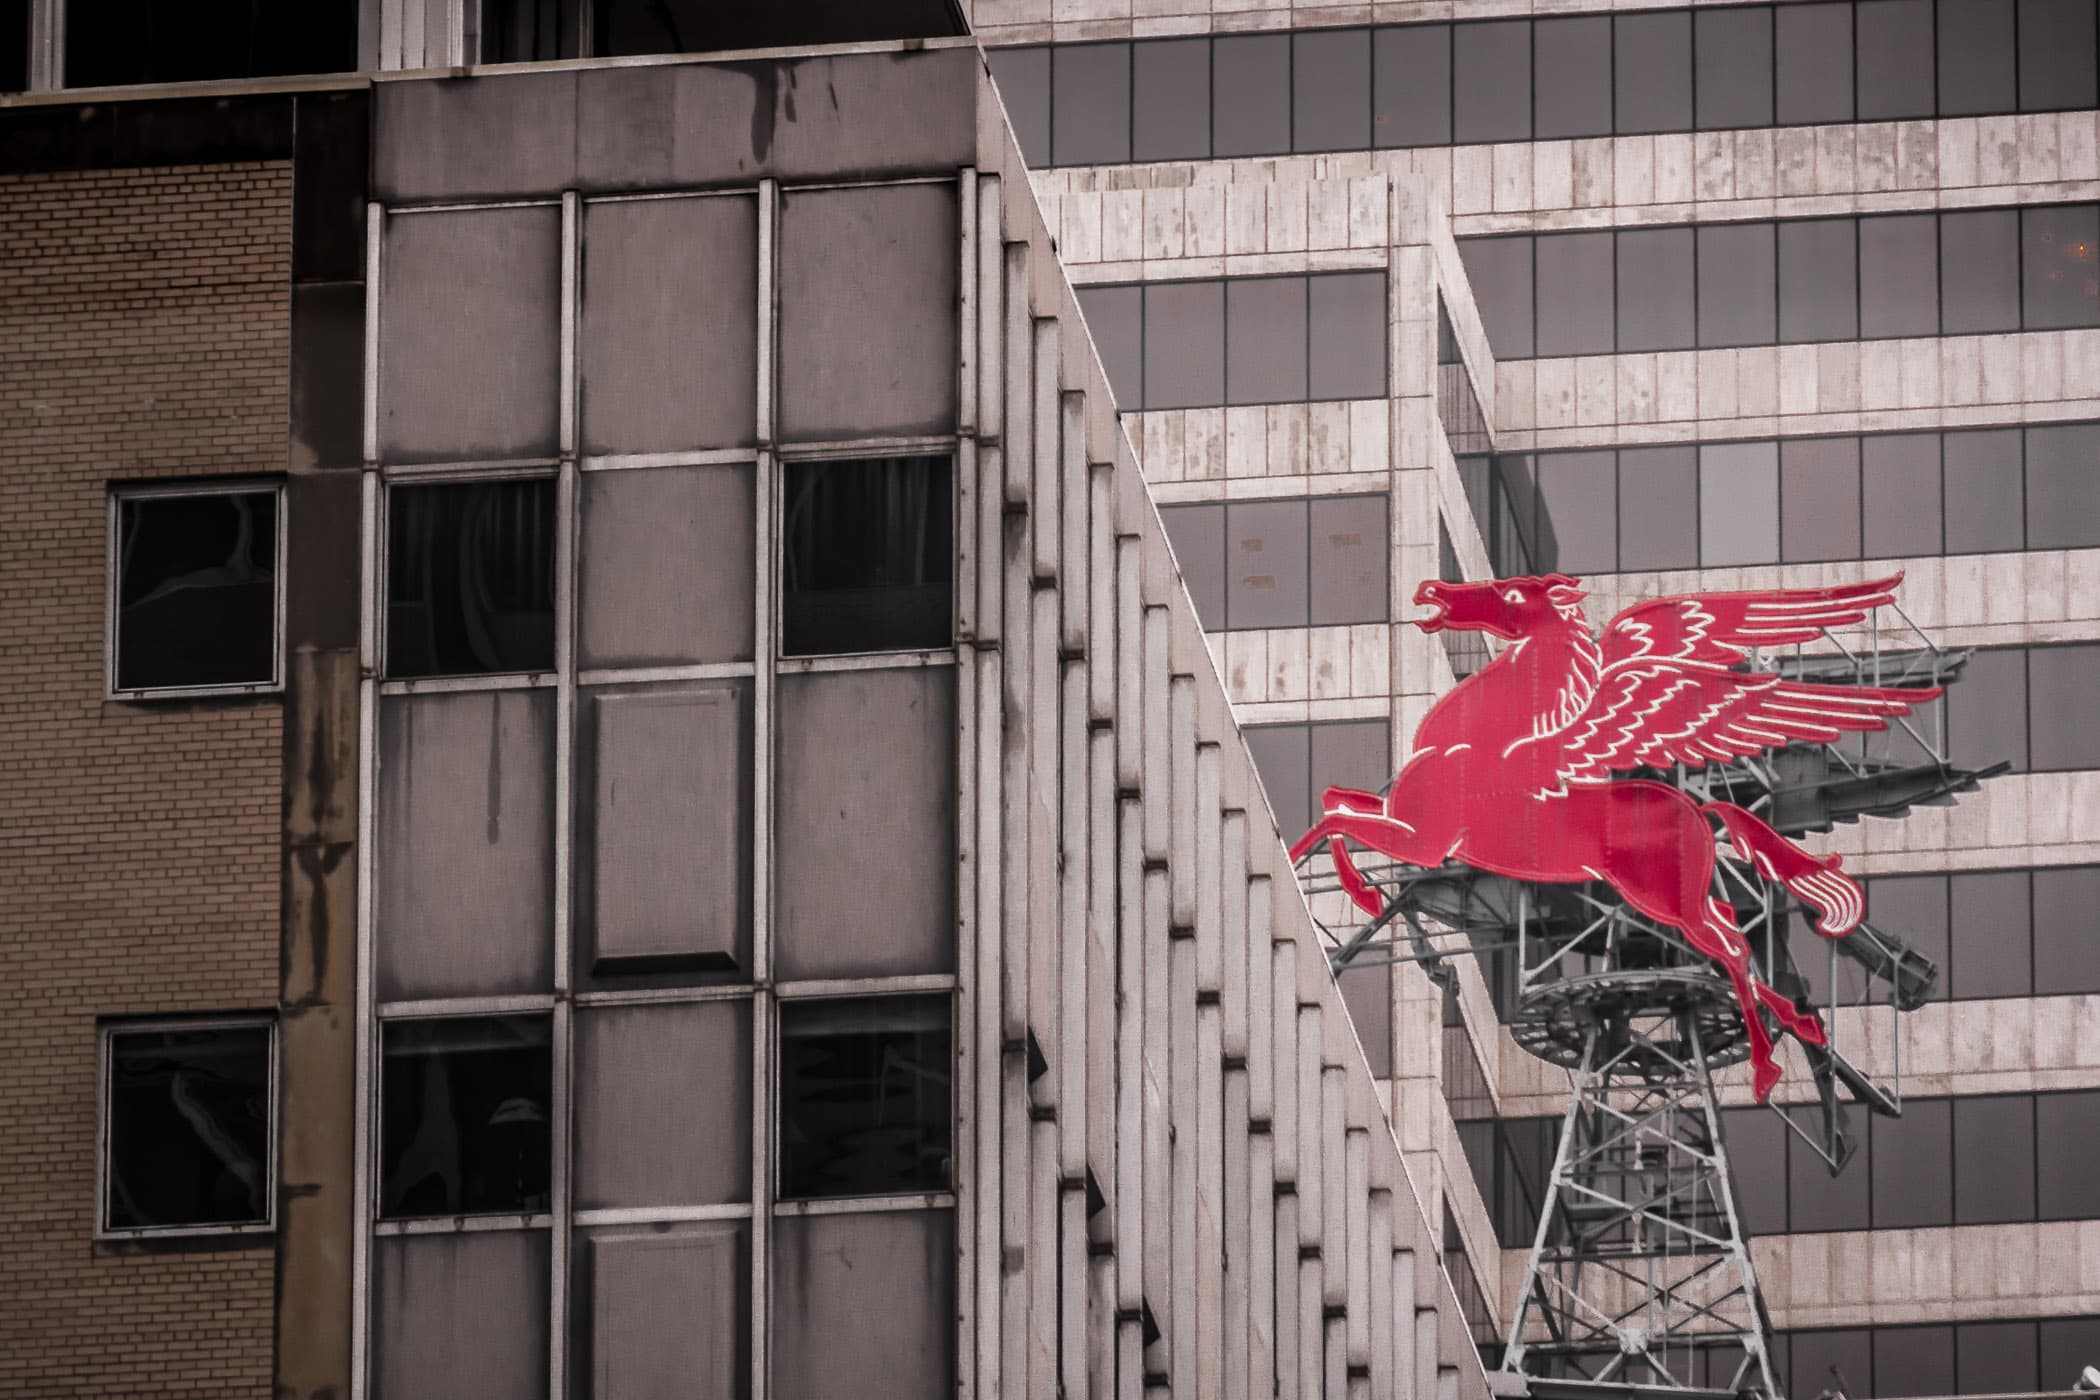 This neon Pegasus sign, atop Dallas' Magnolia Hotel, was originally installed when the building was the headquarters of Magnolia Petroleum (later Mobil Oil).  It was reconstructed in 2000 and has become a symbol of the city.